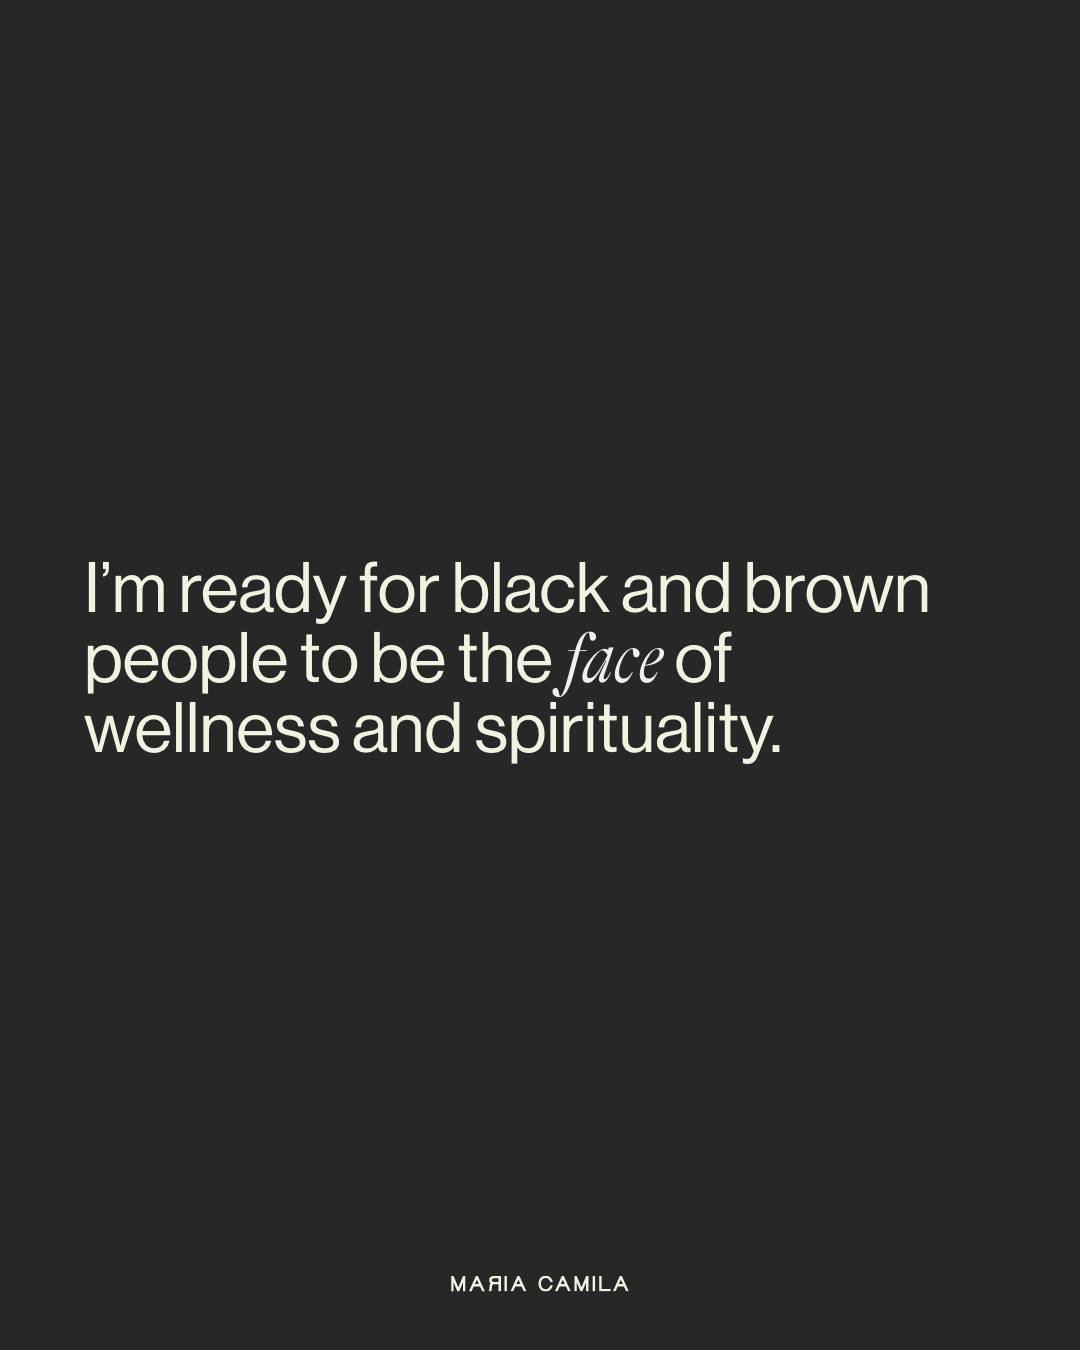 before you go twisting my words, this does not mean no white people. ⁠
⁠
it means - i'm ready for mainstream wellness to be centered around black and brown people's experiences. ⁠
⁠
for BIPOC to be who you think of when you think of ✨ wellness ✨ ⁠
⁠
